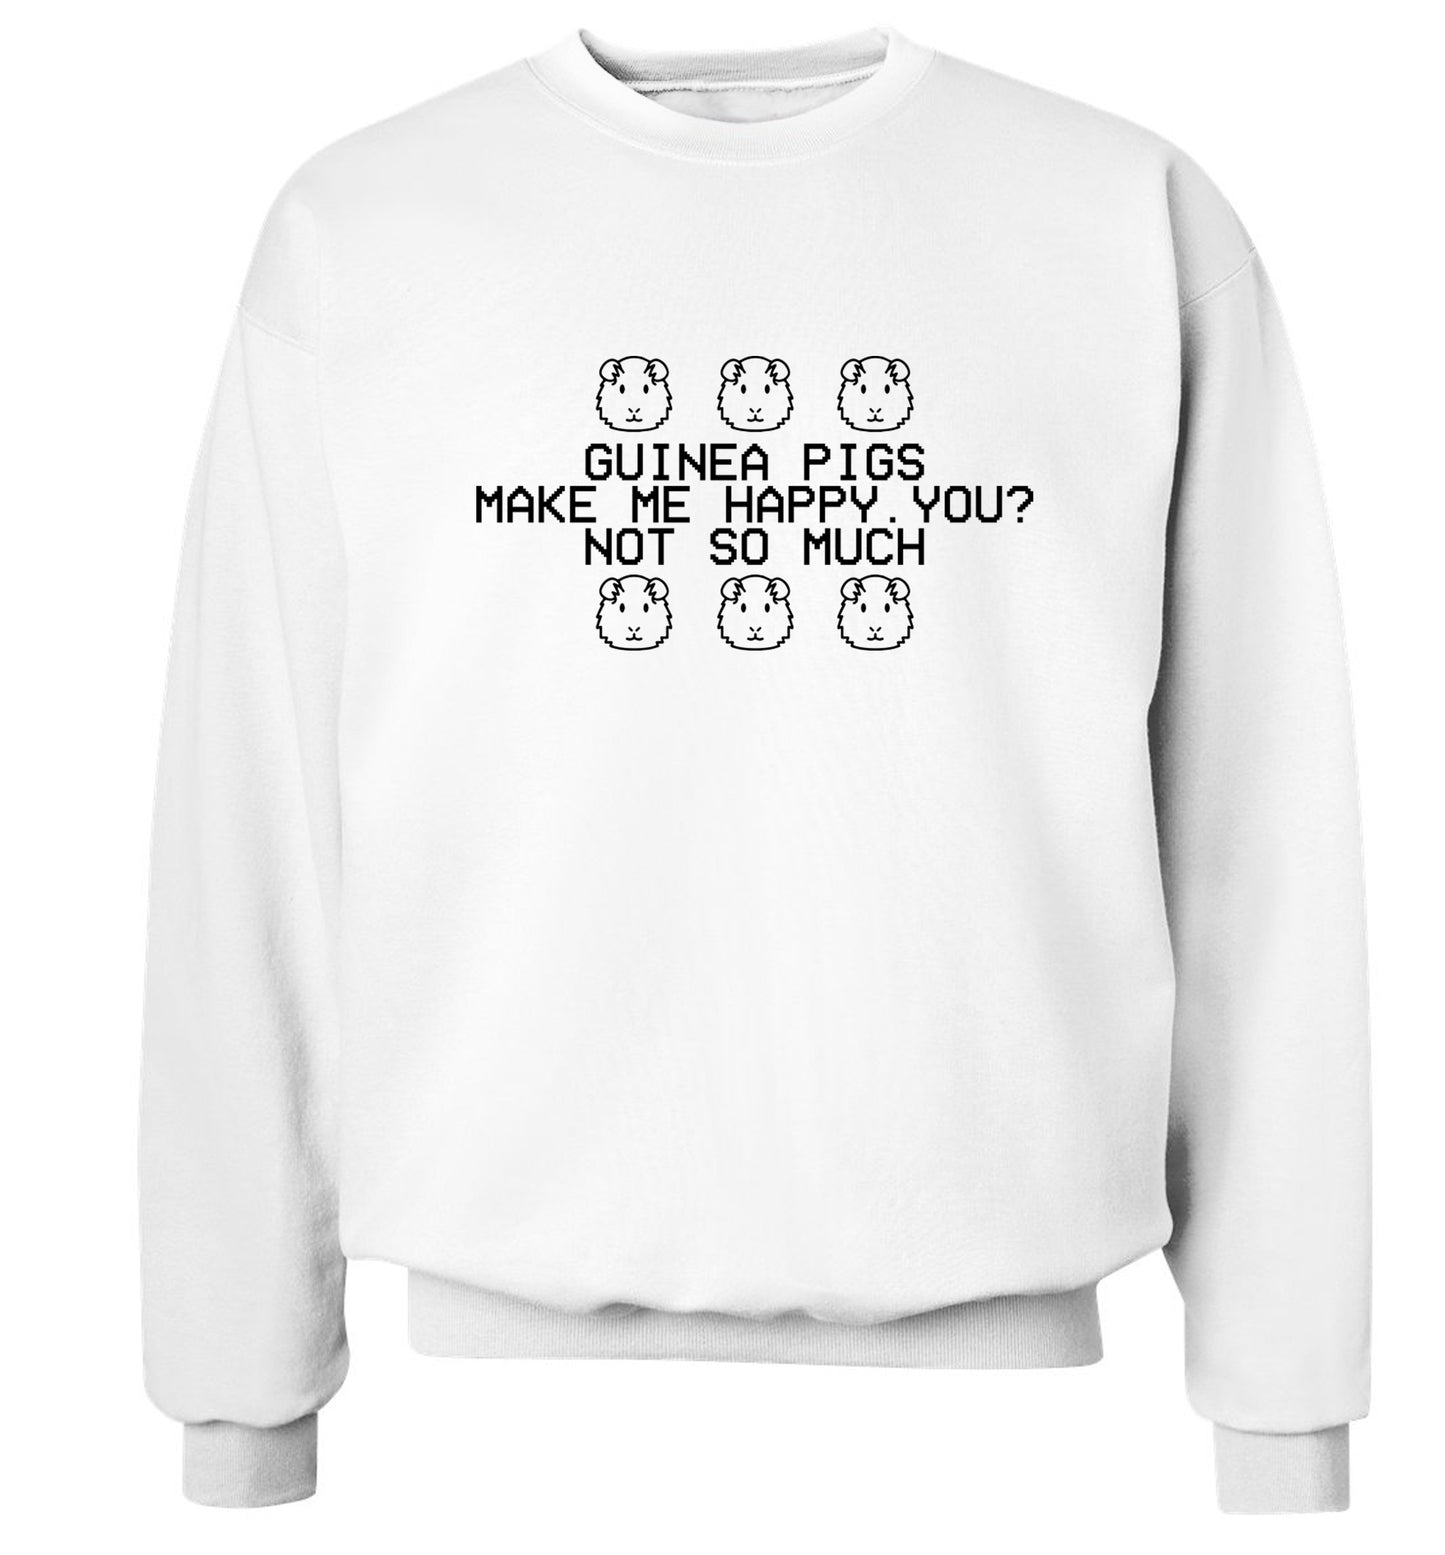 Guinea pigs make me happy, you not so much Adult's unisex white  sweater 2XL